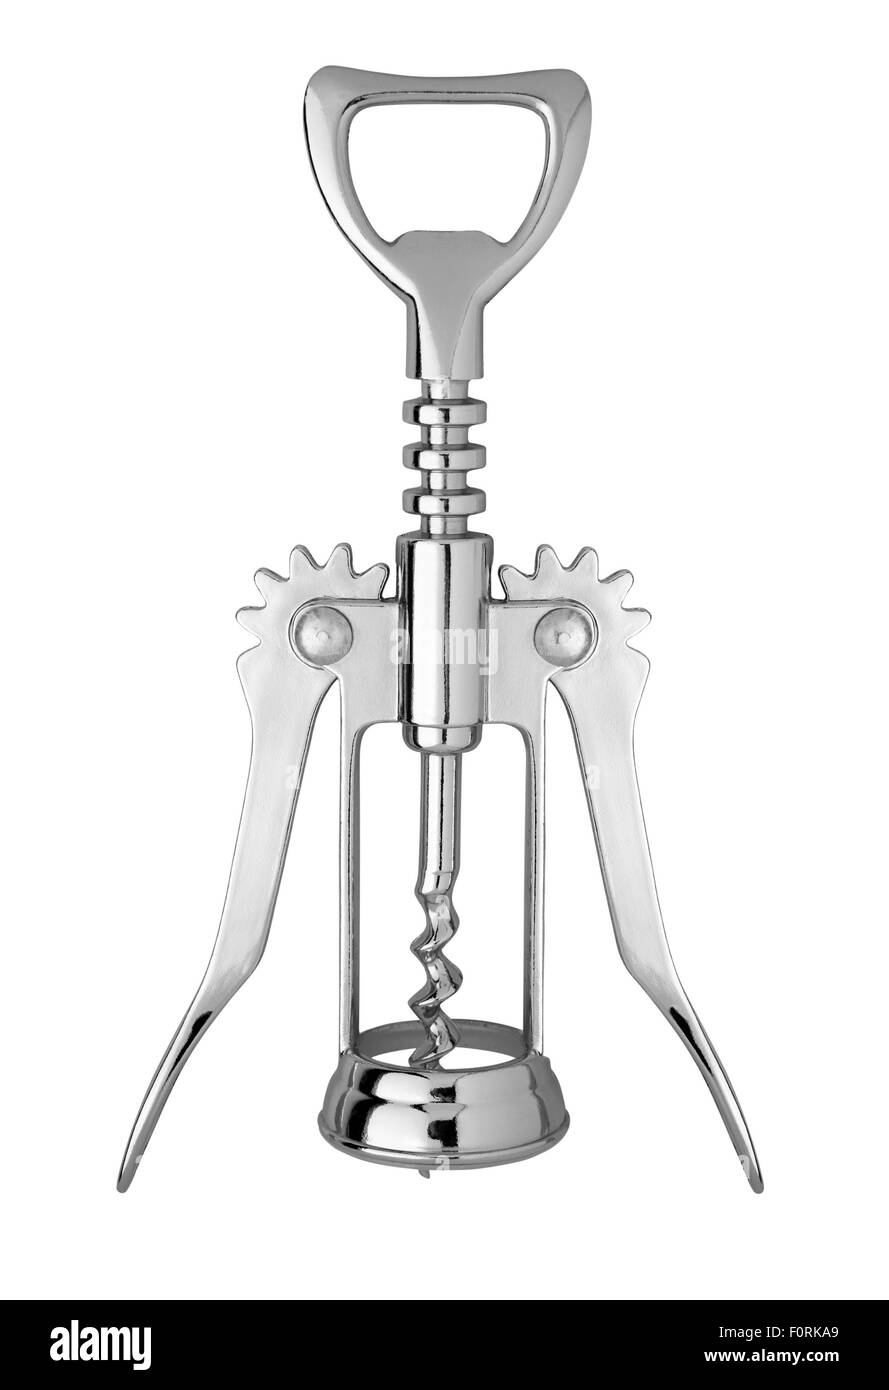 corkscrew isolated on white with clipping path Stock Photo